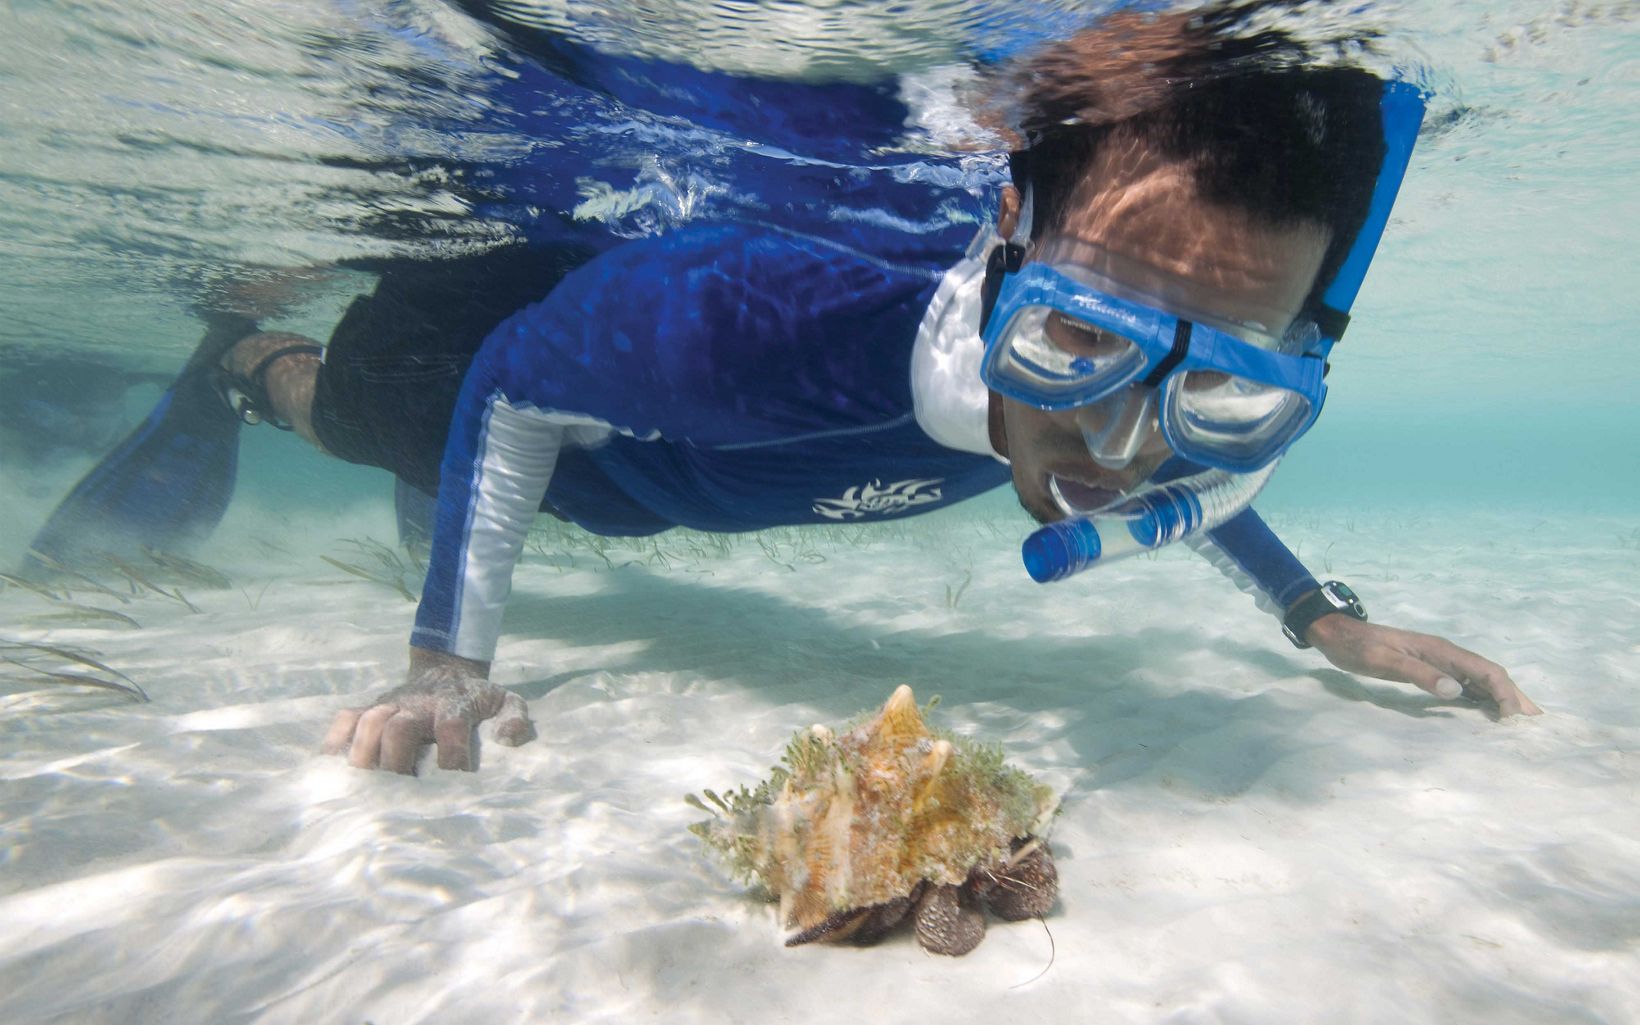 
                
                  Scuba diving Conservancy marine scientist Ancilleno "Leno" Davis, M.Sc., observes a Queen conch shell now inhabited by a hermit crab in the shallow coastal water of Warderick Wells Cay.
                  © Jeff Yonover 
                
              